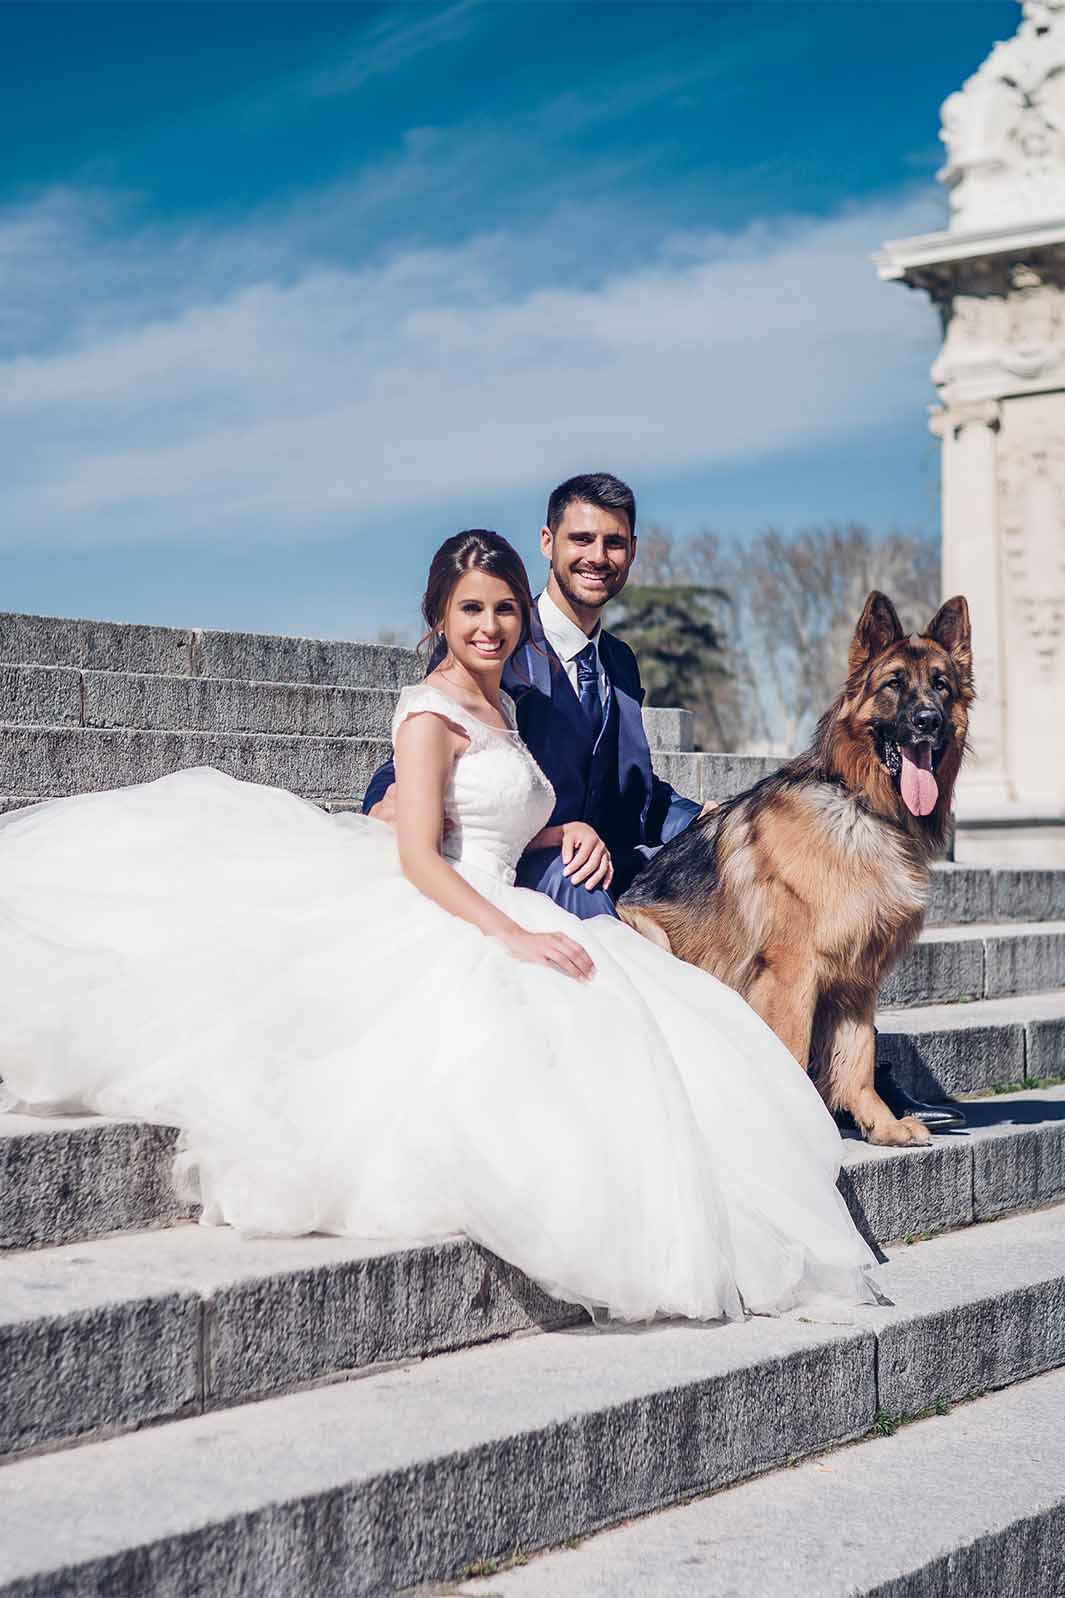 Young smiling newlyweds sitting with their dog on the church steps.